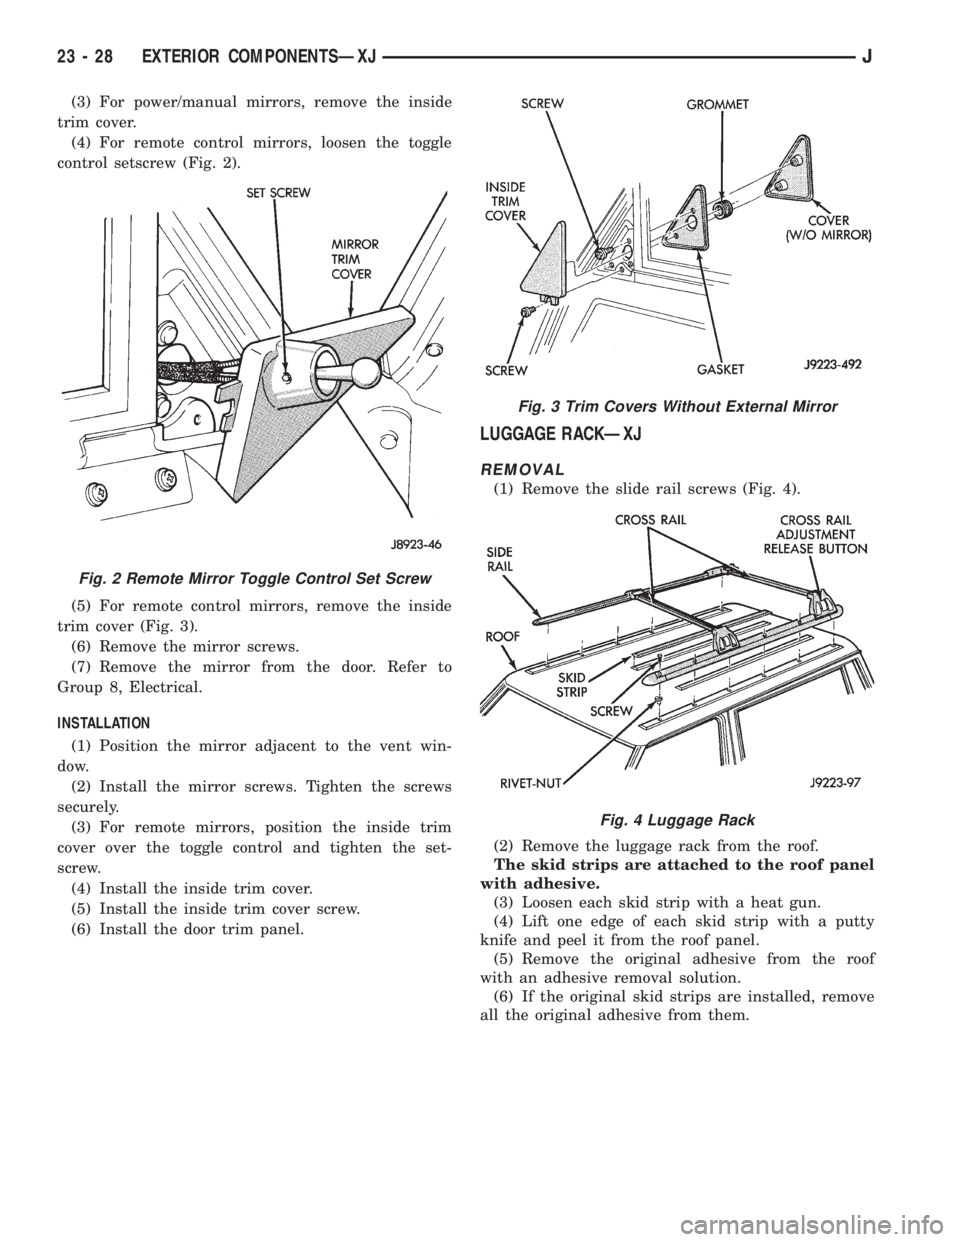 JEEP XJ 1995  Service And Repair Manual (3) For power/manual mirrors, remove the inside
trim cover.
(4) For remote control mirrors, loosen the toggle
control setscrew (Fig. 2).
(5) For remote control mirrors, remove the inside
trim cover (F